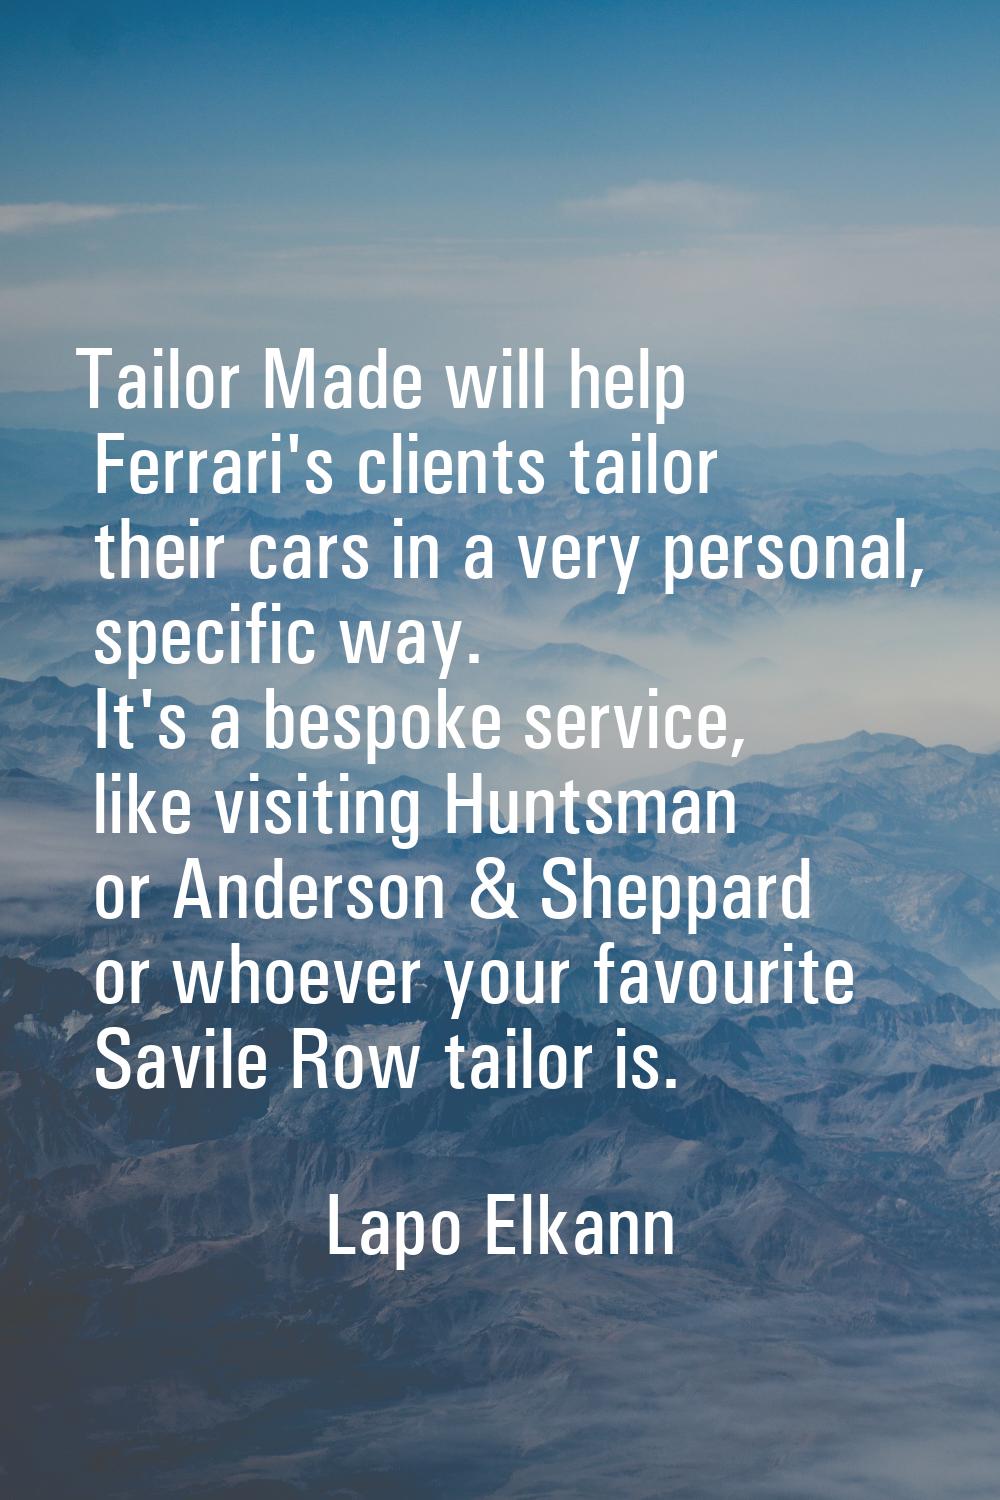 Tailor Made will help Ferrari's clients tailor their cars in a very personal, specific way. It's a 